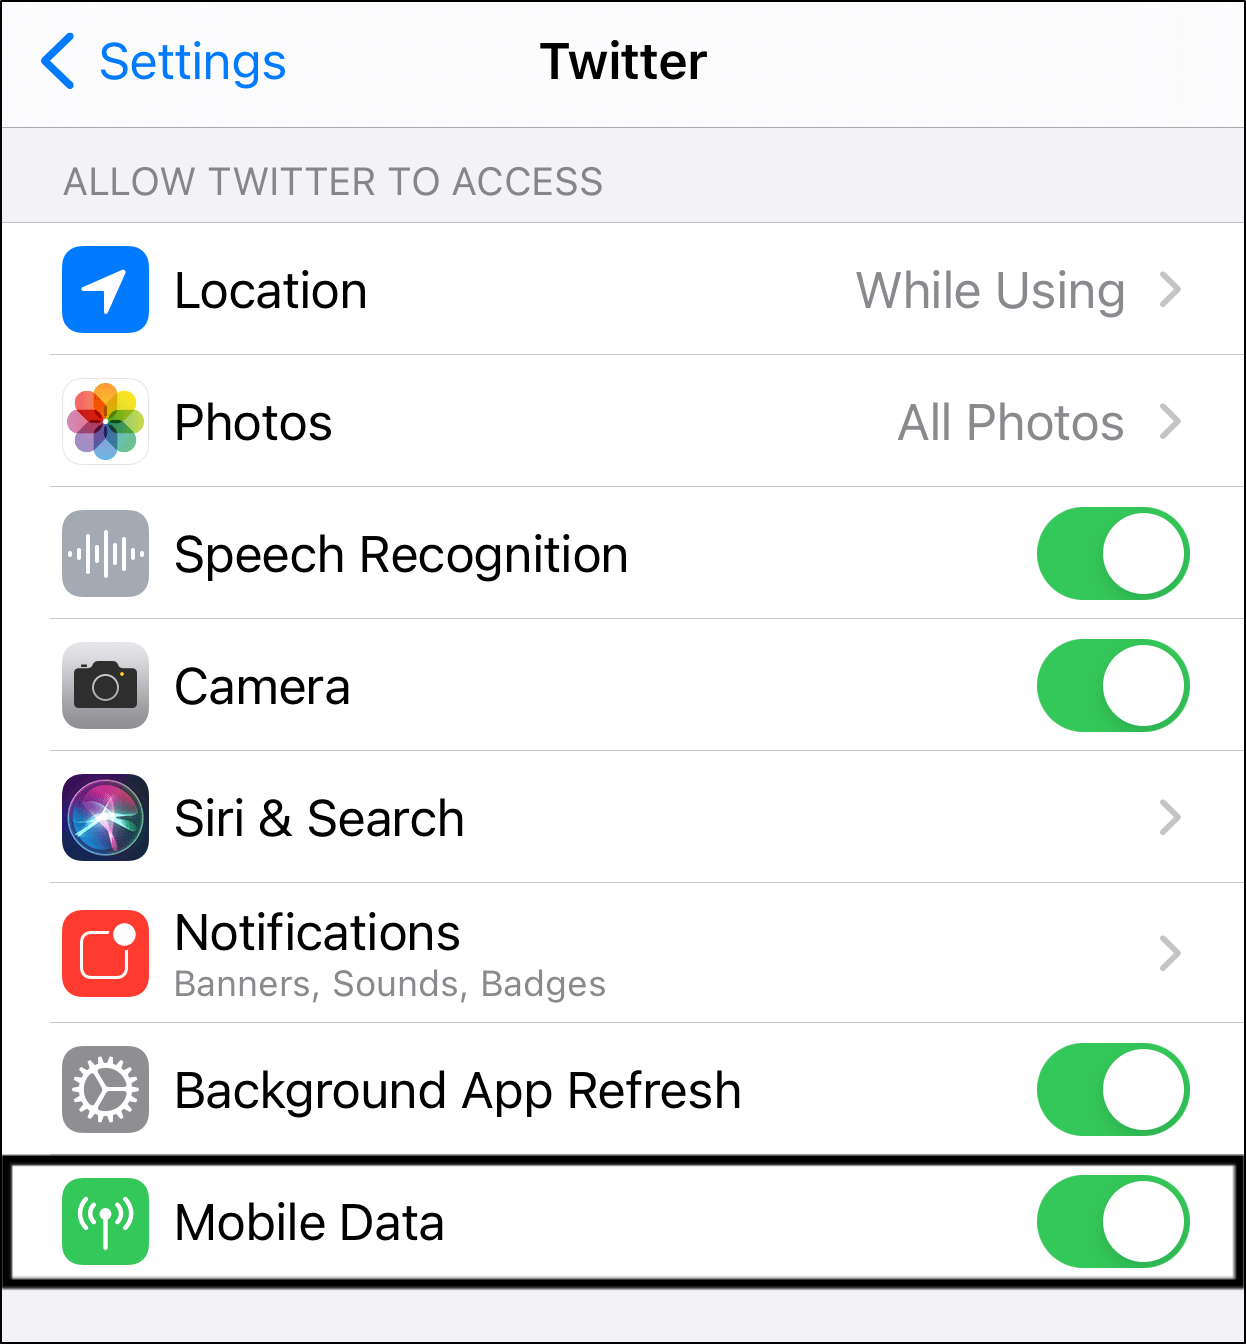 allow mobile data access for Twitter app through settings on iPhone or iPad to fix images or photos not loading or showing